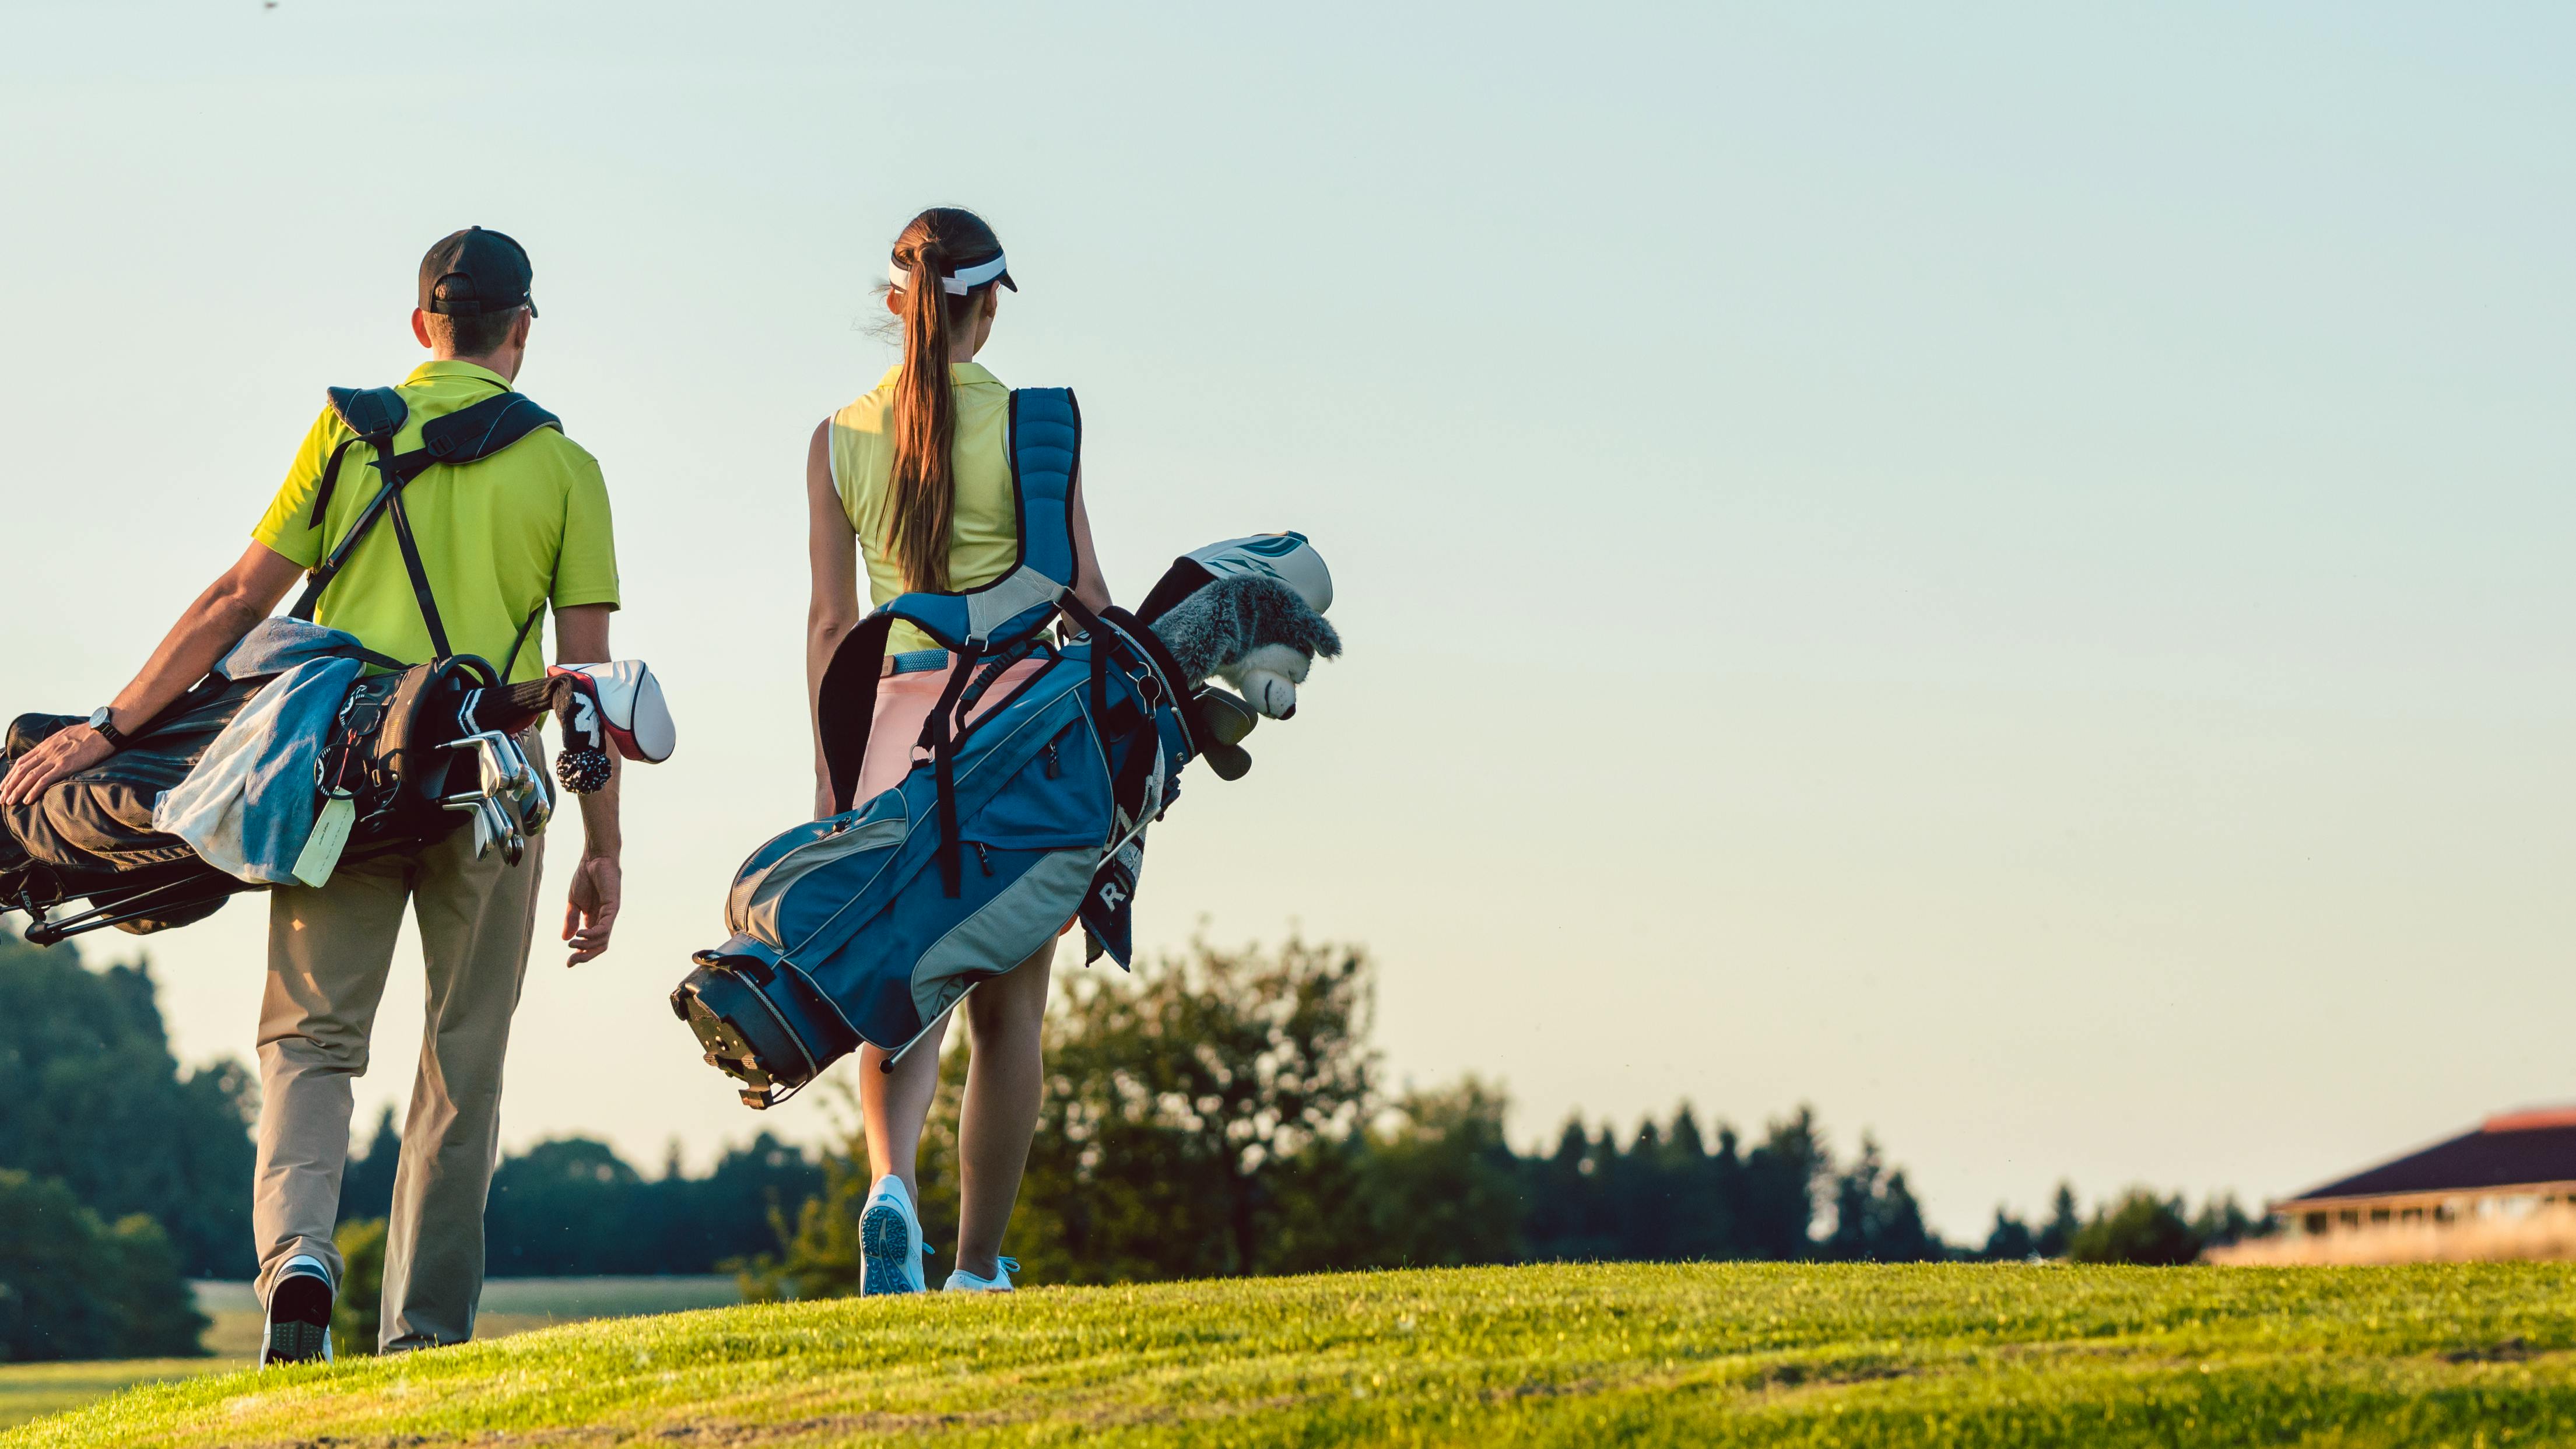 Two golfers walking on a golf course while carrying their golf bags. 